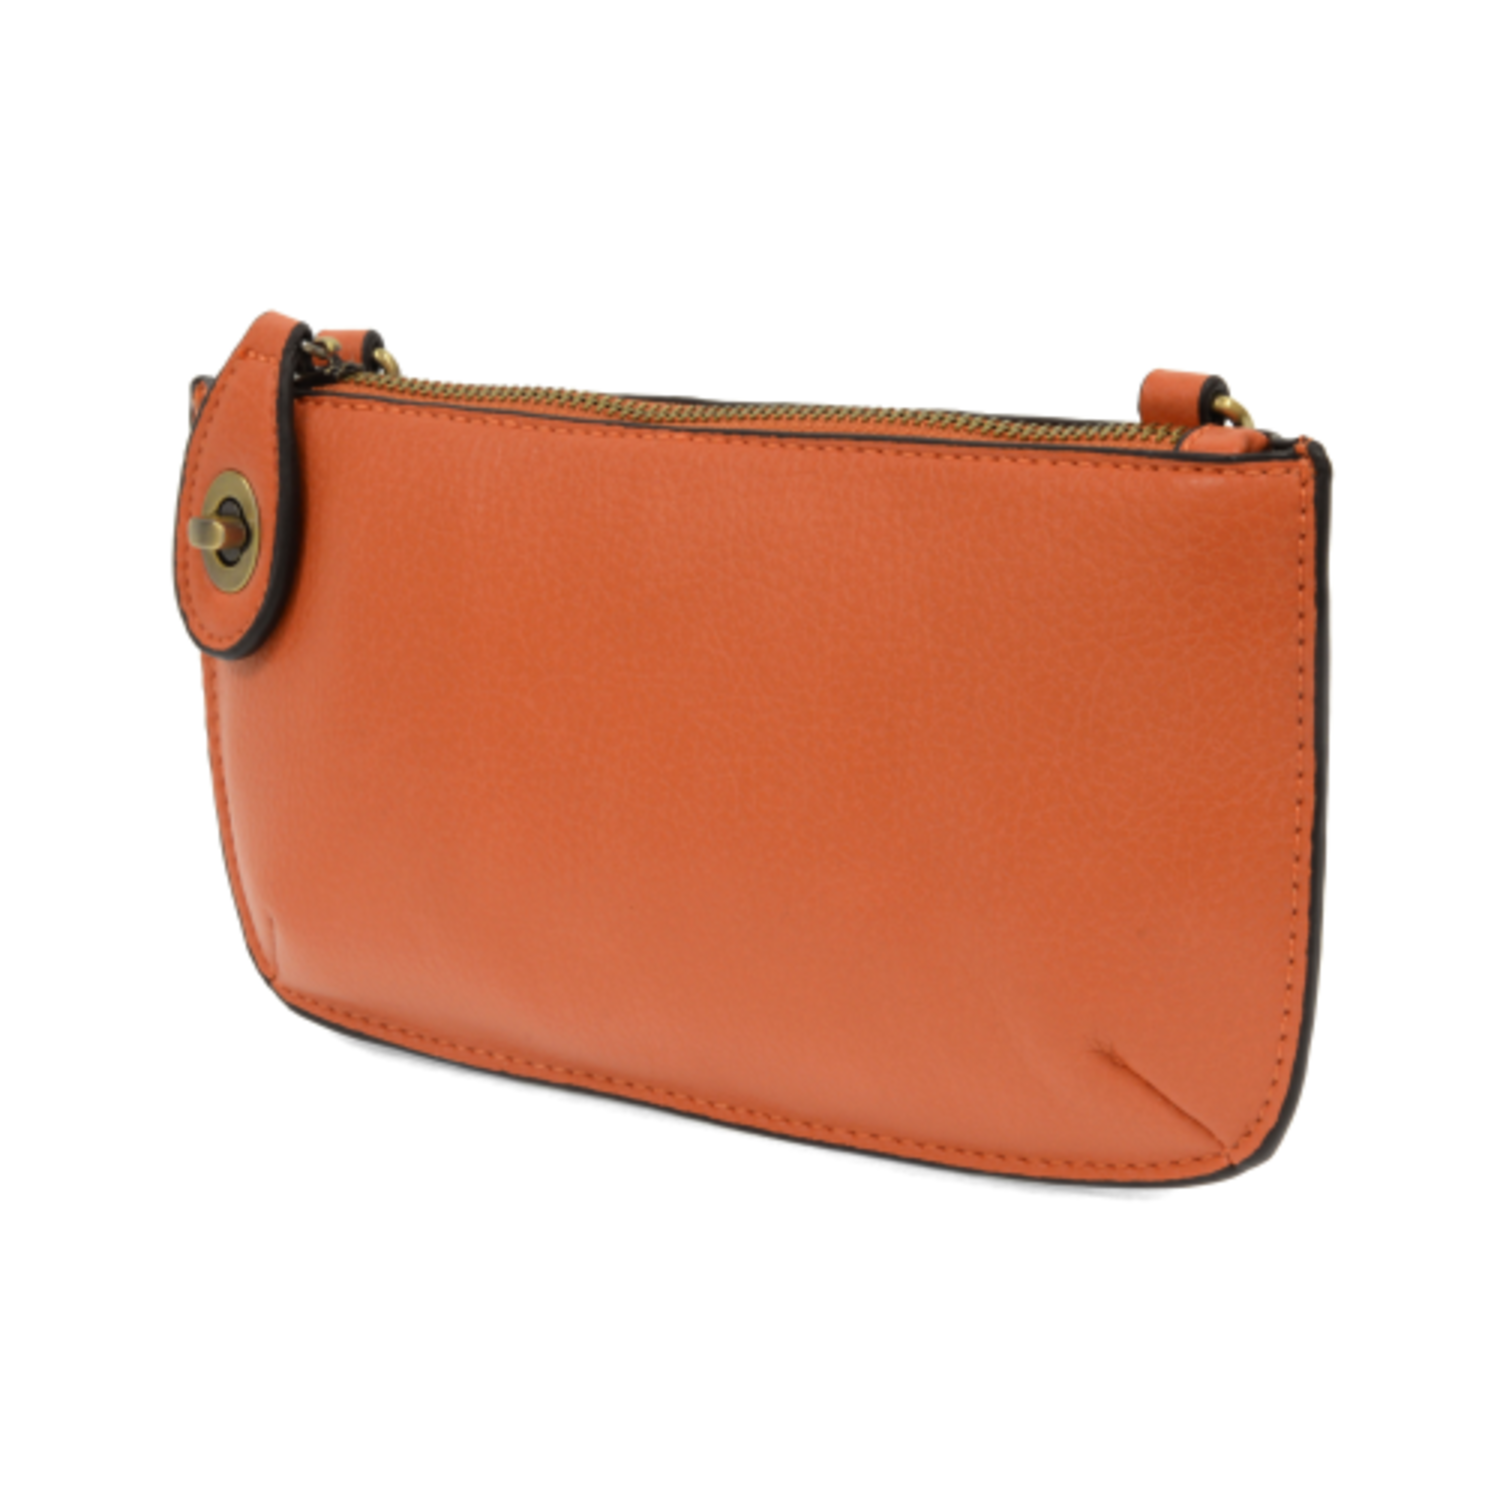 Humble Chic Ny Humble Chic Vegan Leather Wristlet Wallet Clutch - India |  Ubuy